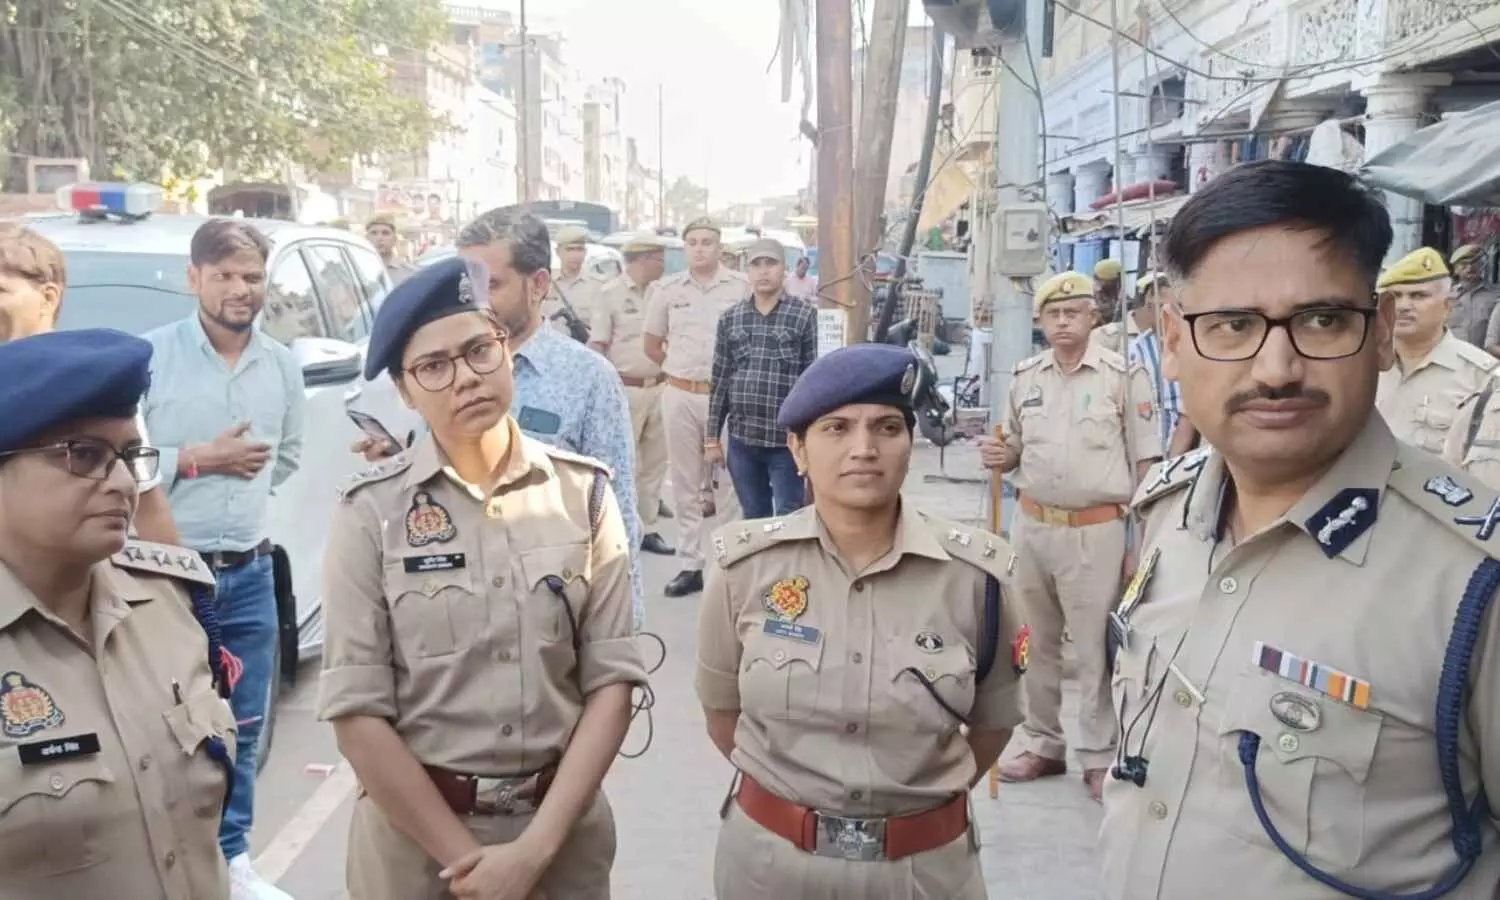 Kanpur Police increased security of sensitive areas